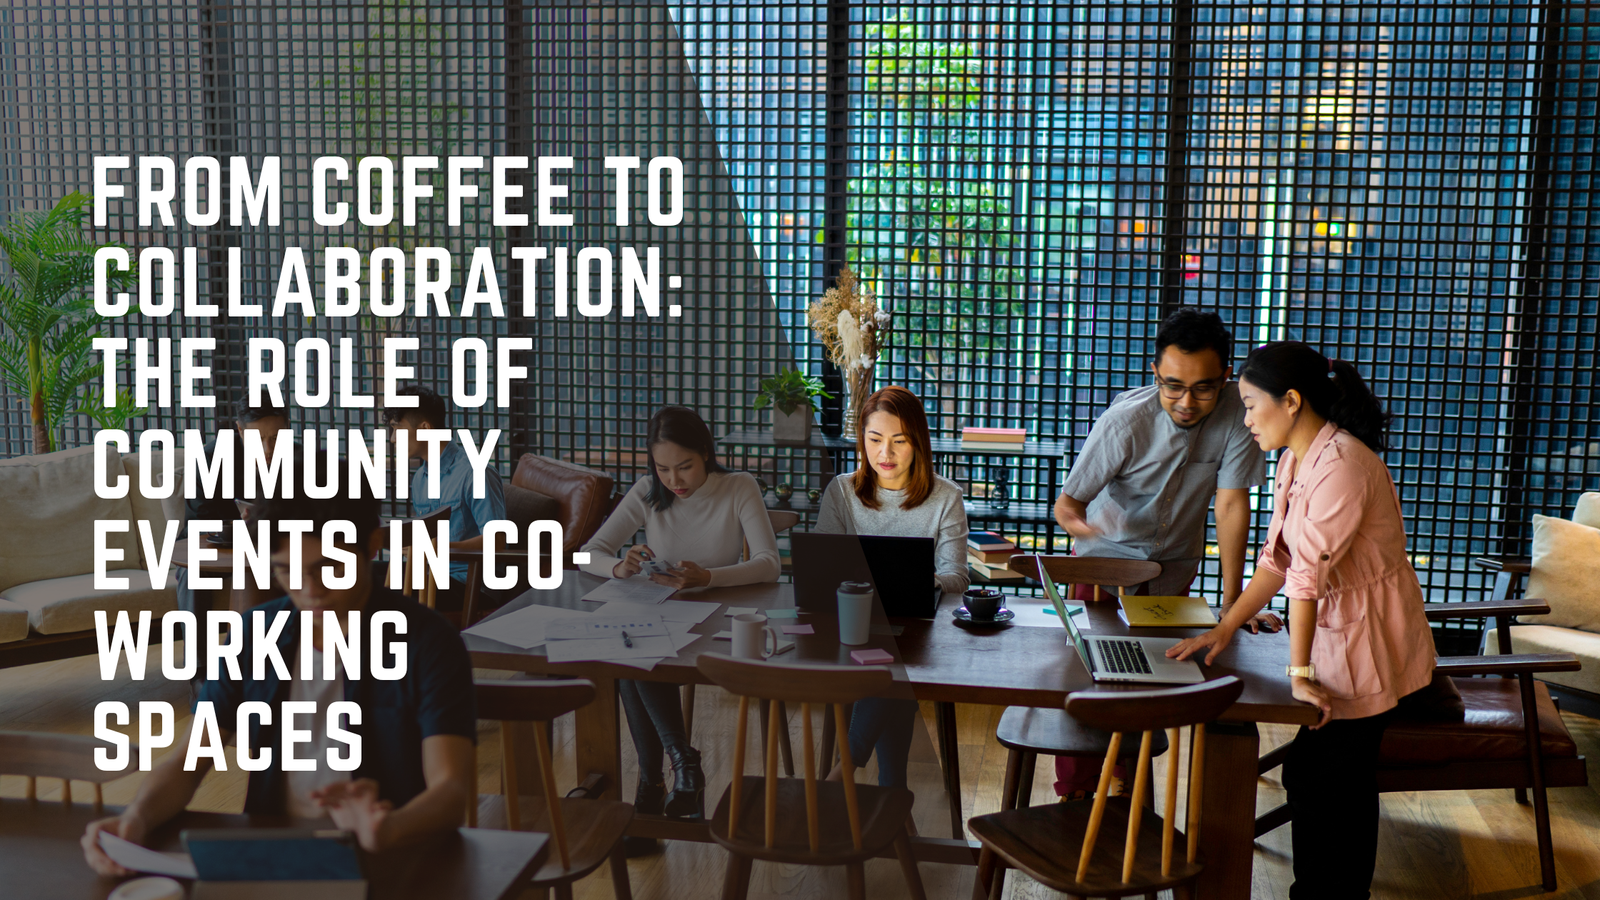 From Coffee to Collaboration: The Role of Community Events in Co-Working Spaces